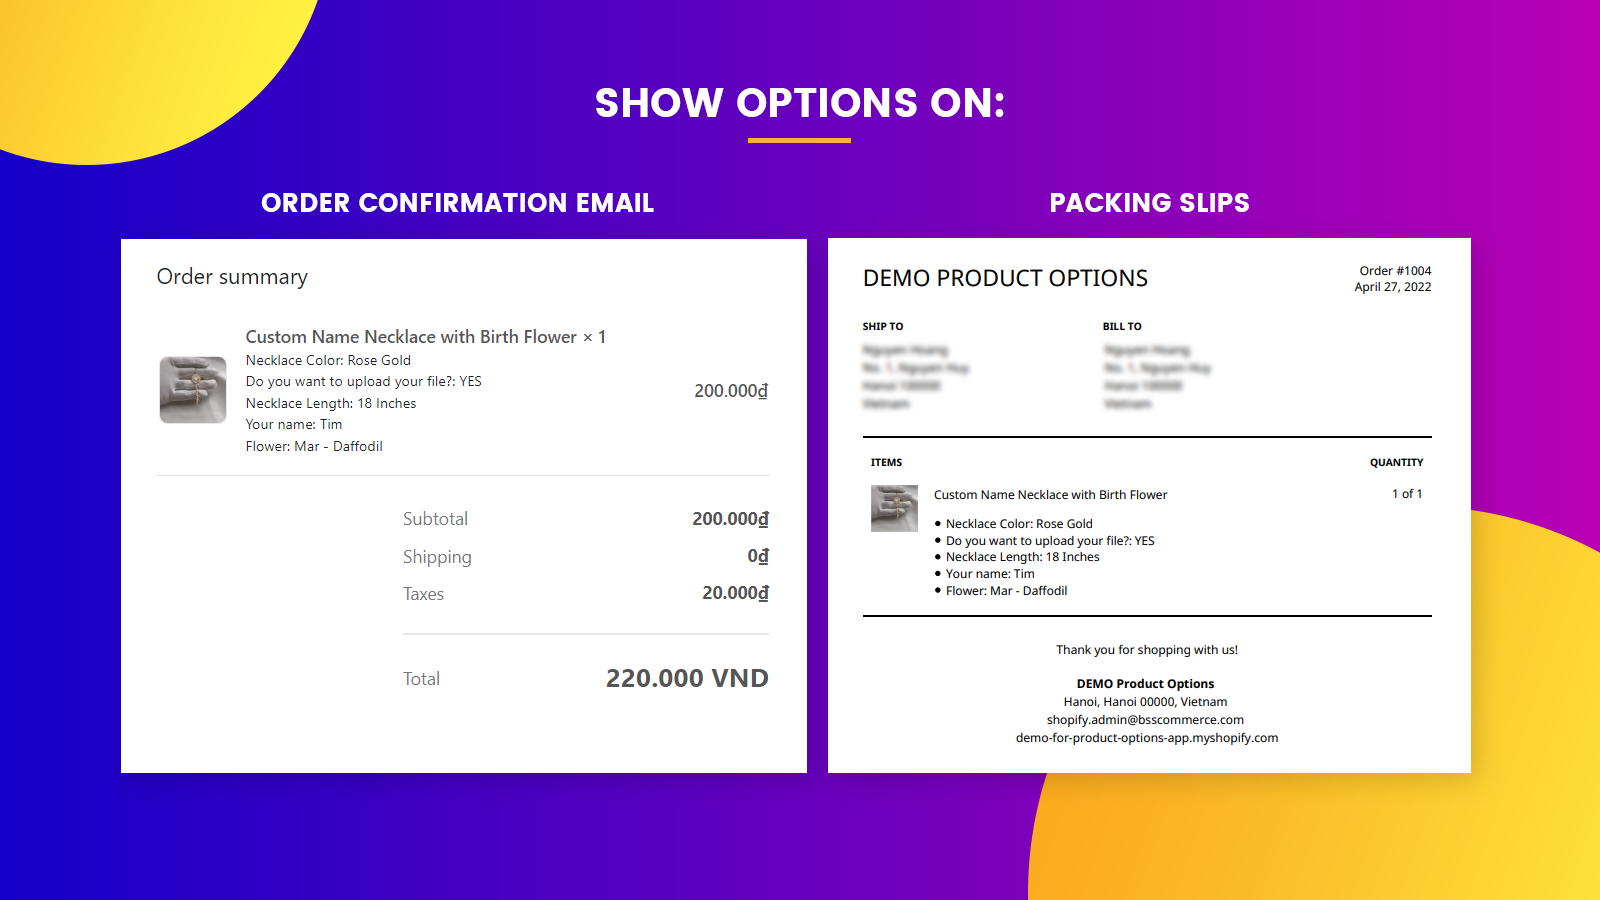 Show Options on Order Confirmation Email & Packing Slips